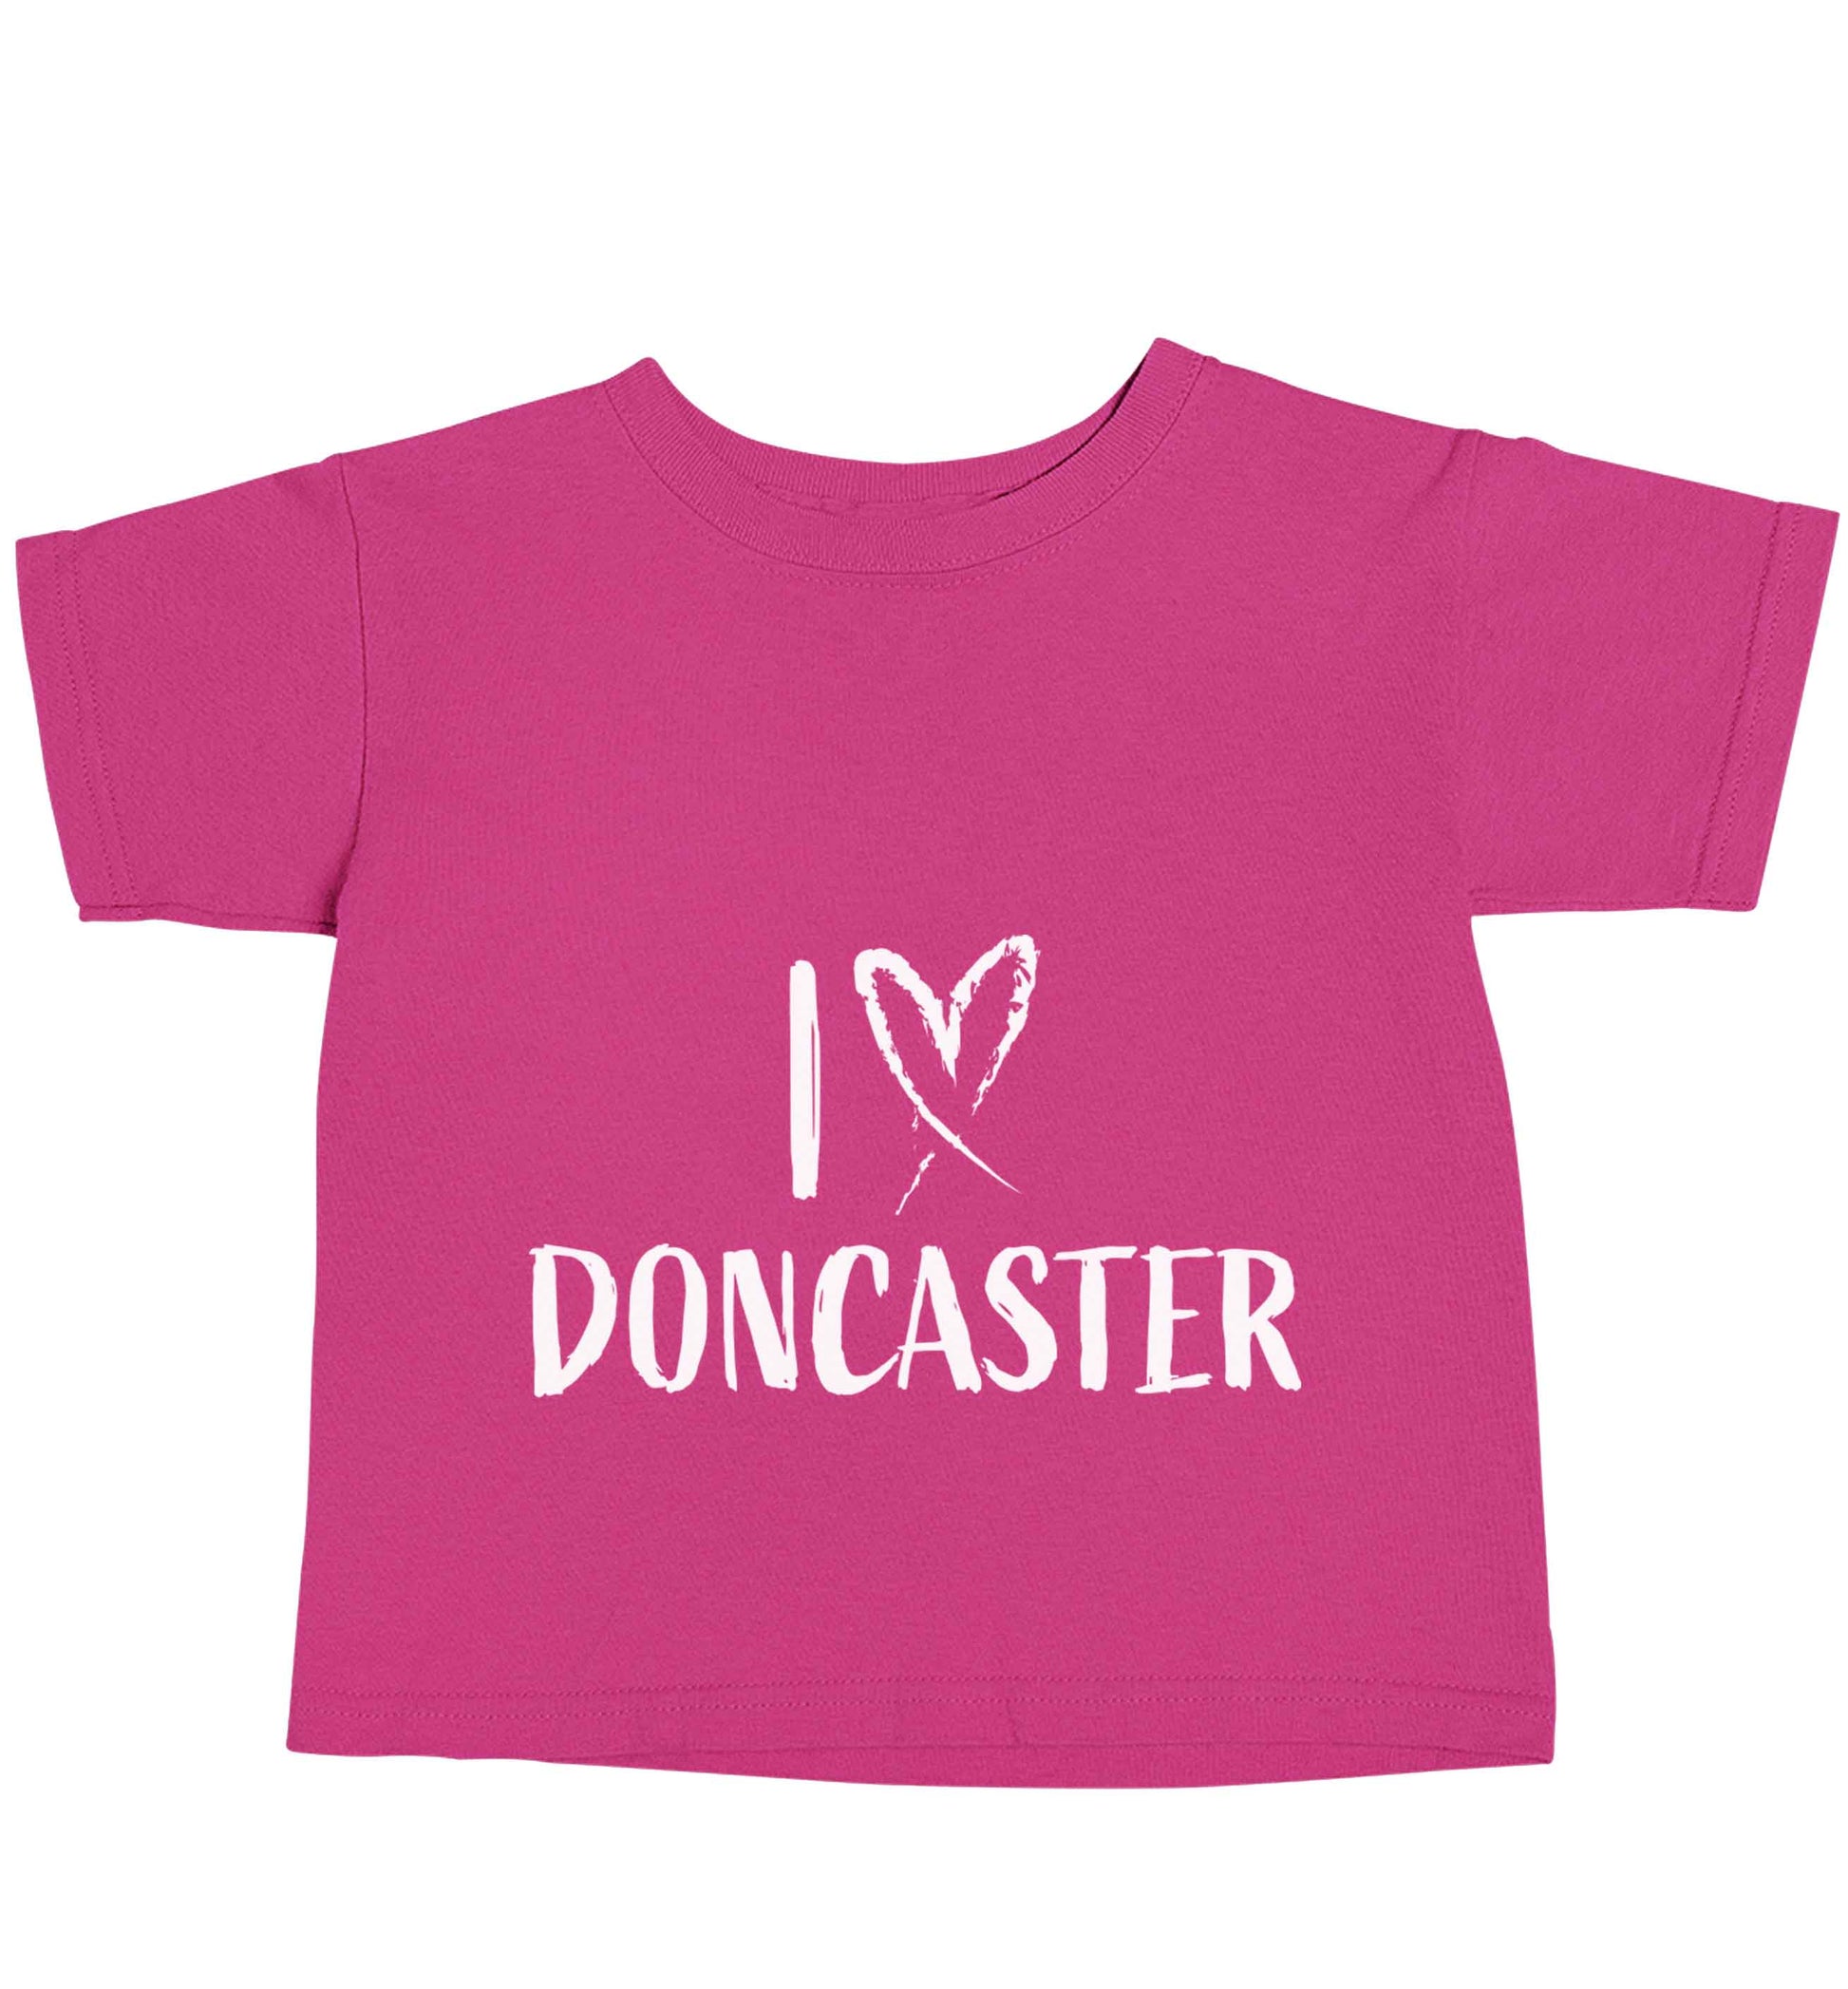 I love Doncaster pink baby toddler Tshirt 2 Years